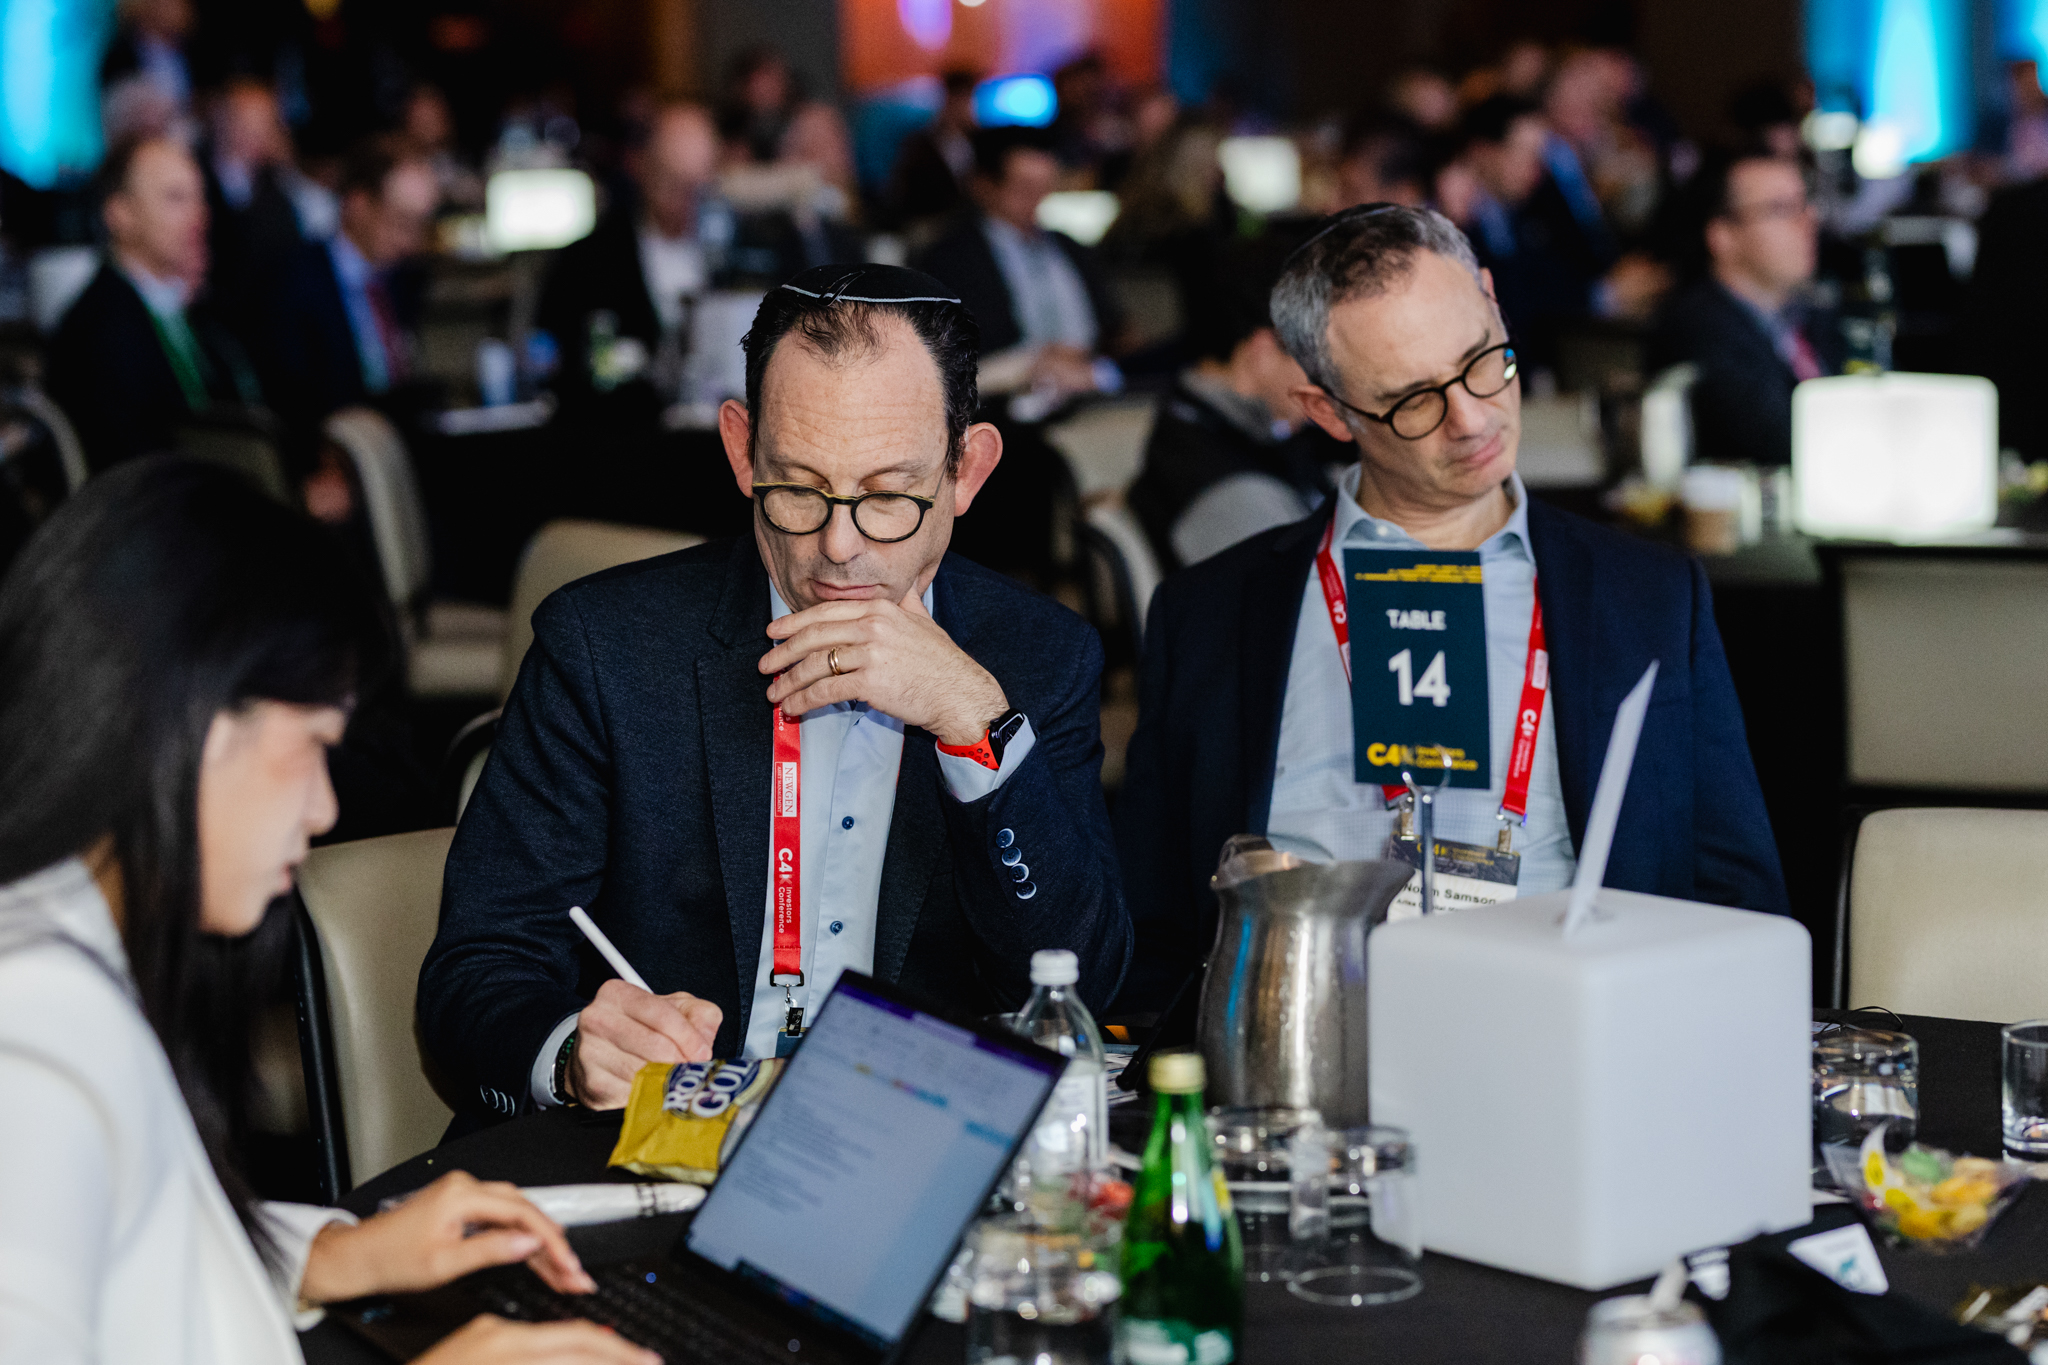 Conference Photography: A group of people sitting at a table with laptops, captured in a visually engaging manner.